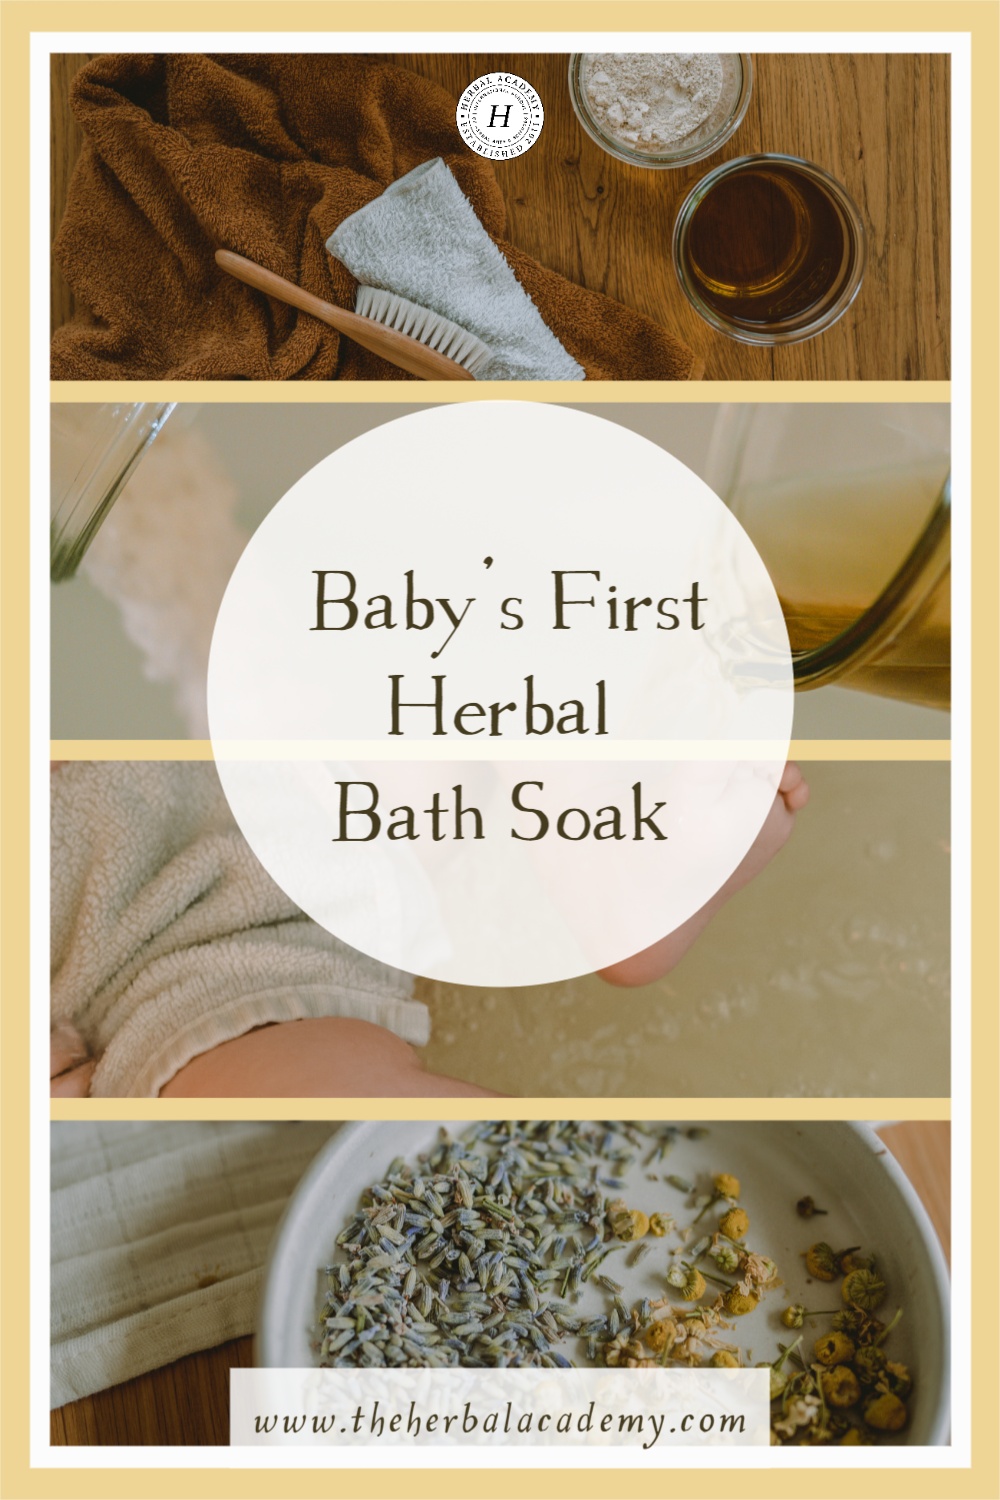 Baby’s First Herbal Bath Soak | Herbal Academy | In this article, you will find a recipe for a baby's very first herbal bath soak with natural soothing ingredients for the body and mind.